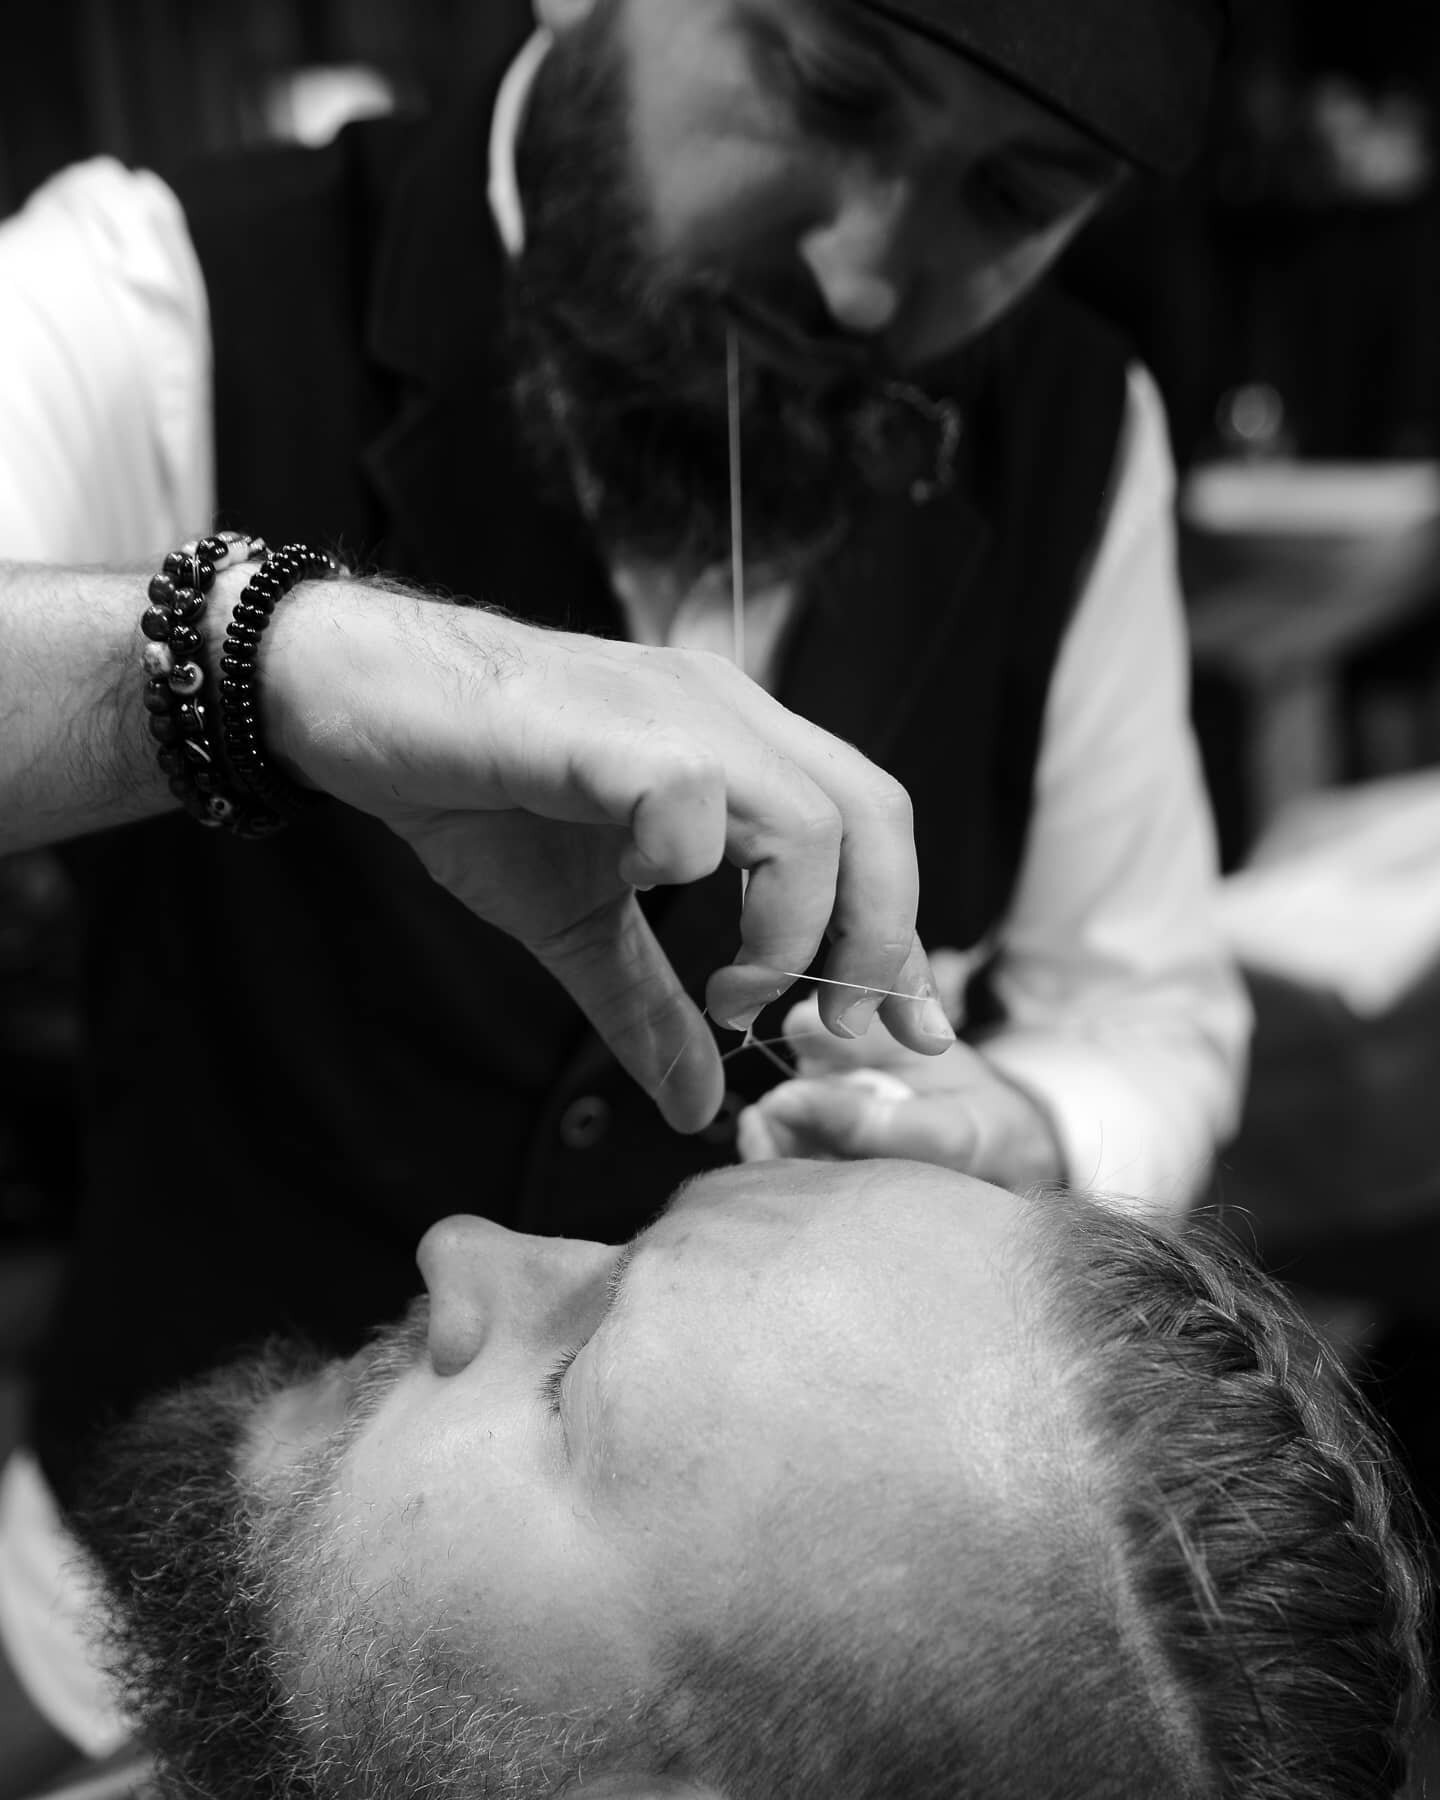 The little details&nbsp;are by far the&nbsp;most important. 

#tonsorialparlor #arundel #westsussex #bestbarbershop #hair #male #maletrends #barbering #barberlife #fadegame #luxury #style #hairtrends #grooming #internationalbarbers #behindthechair #m